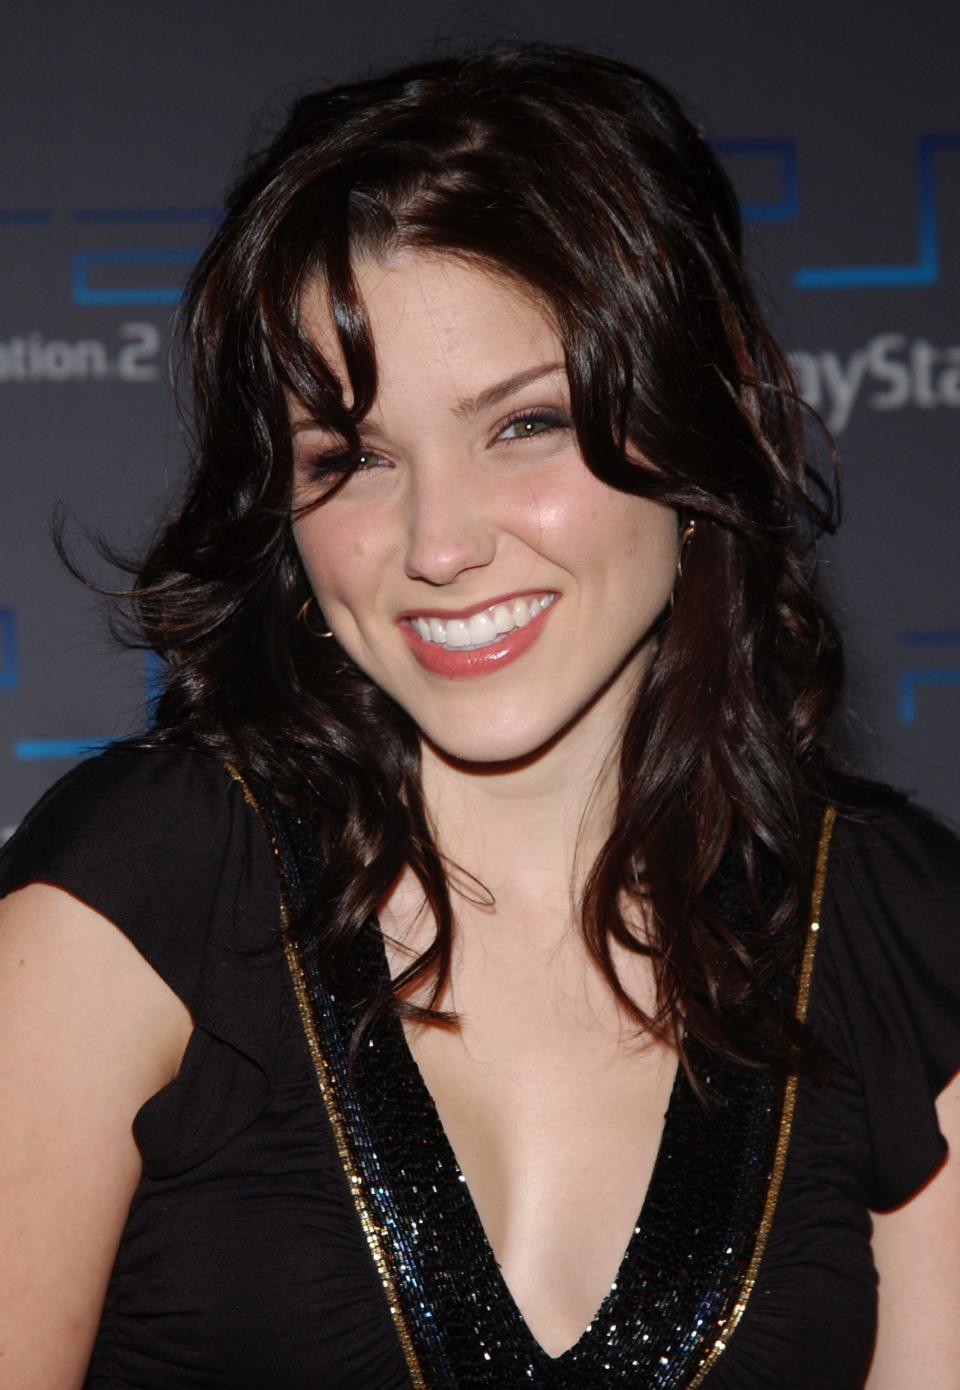 Sophia Bush during PlayStation 2 Offers A Passage Into "The Underworld"